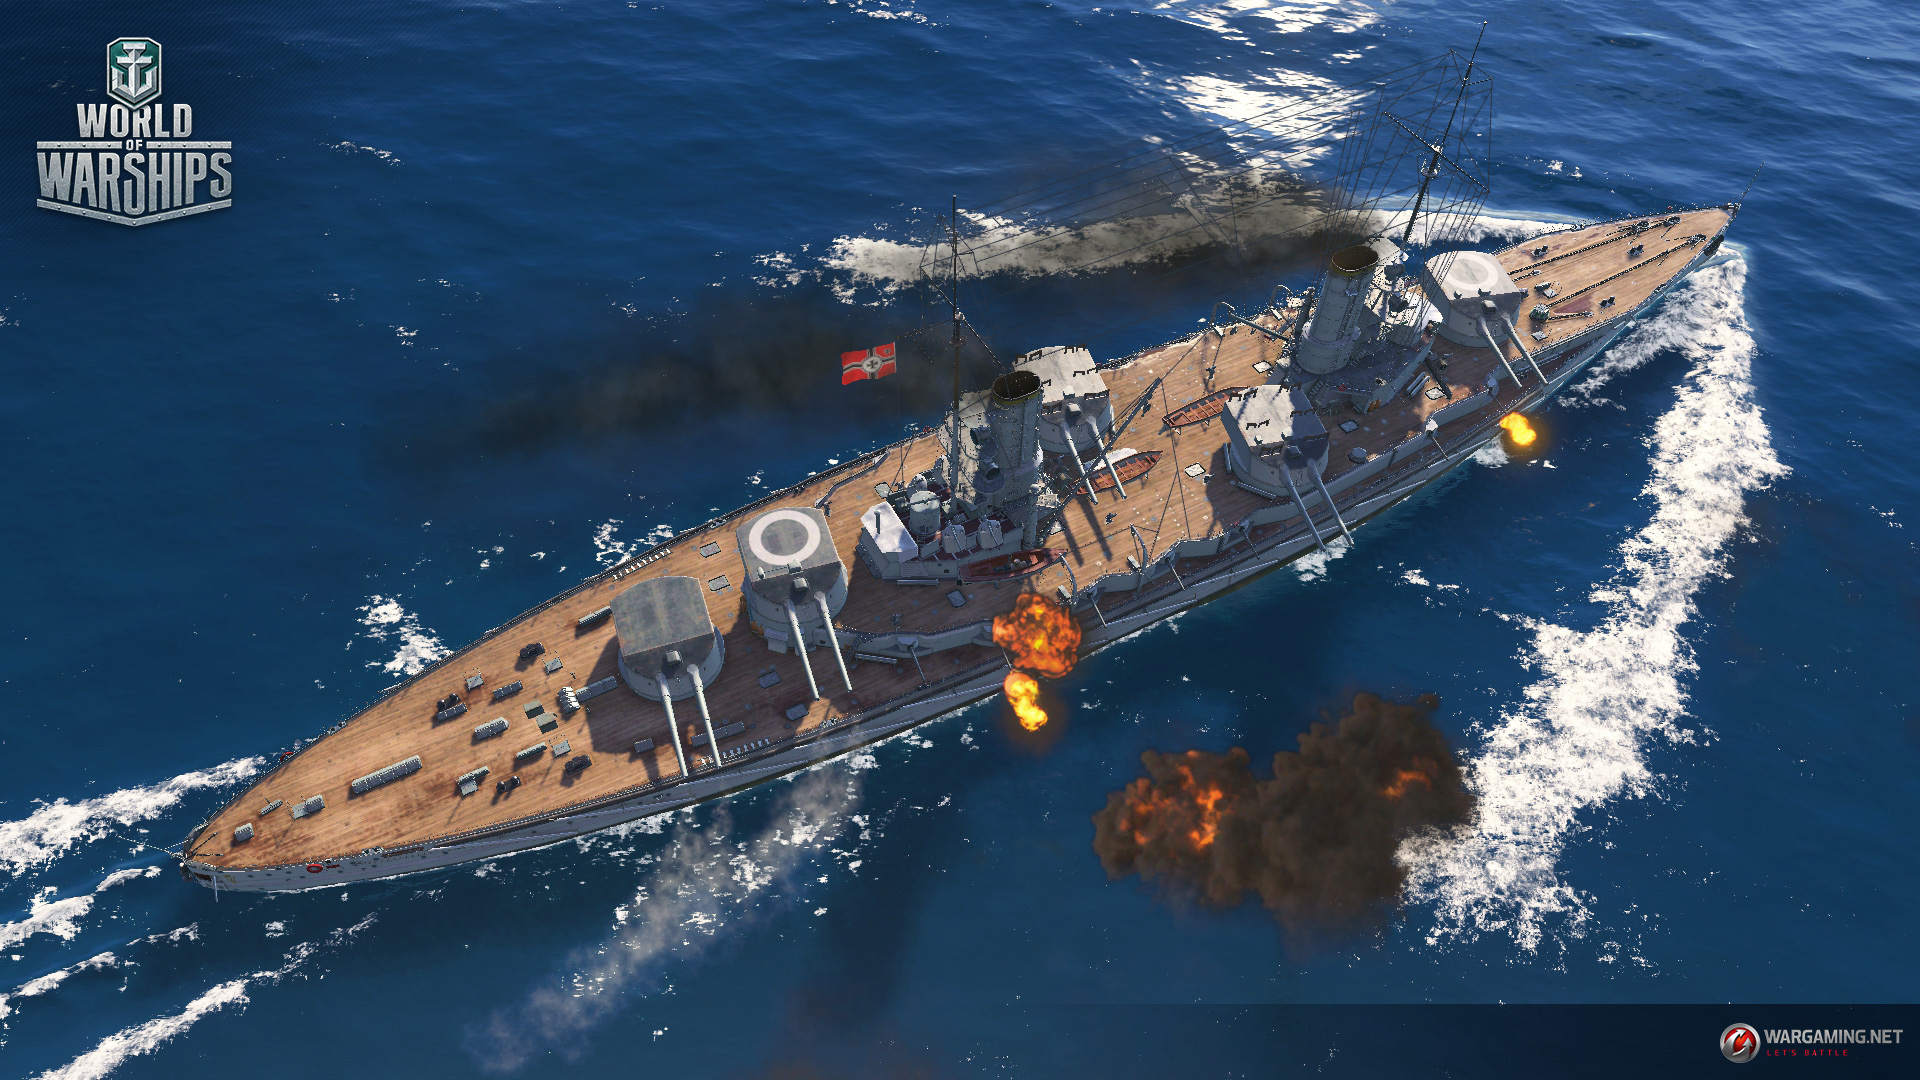 world of warships operations guide